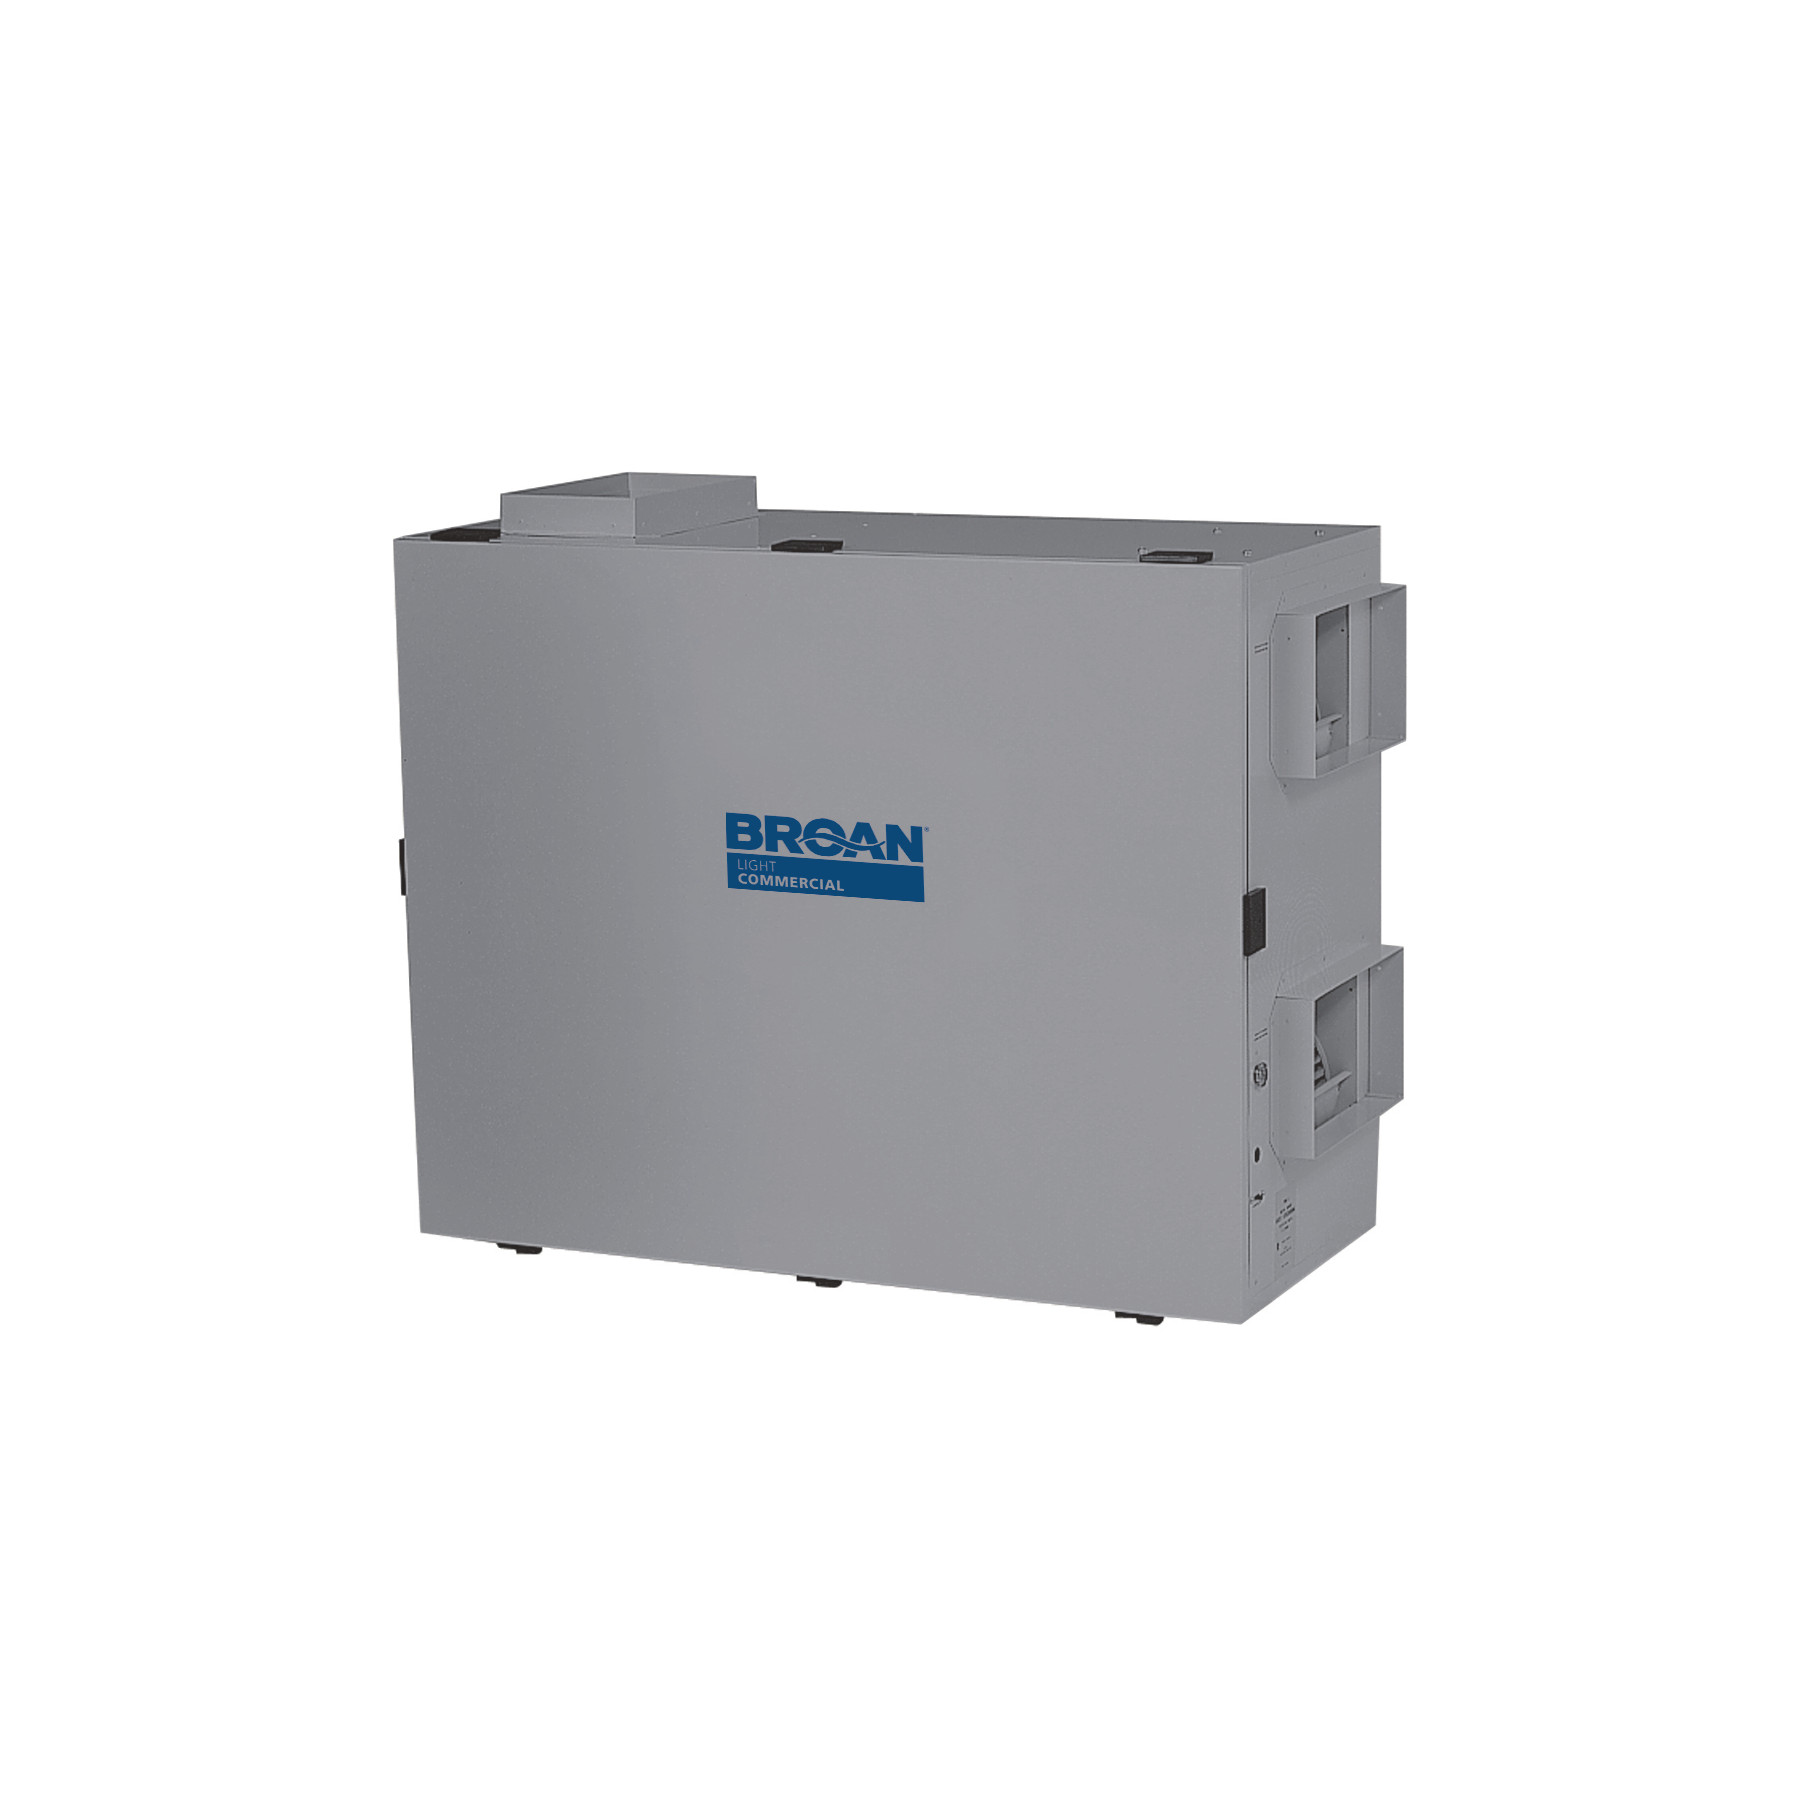 Broan® Light Commercial unit for pool and other extremely humid locations